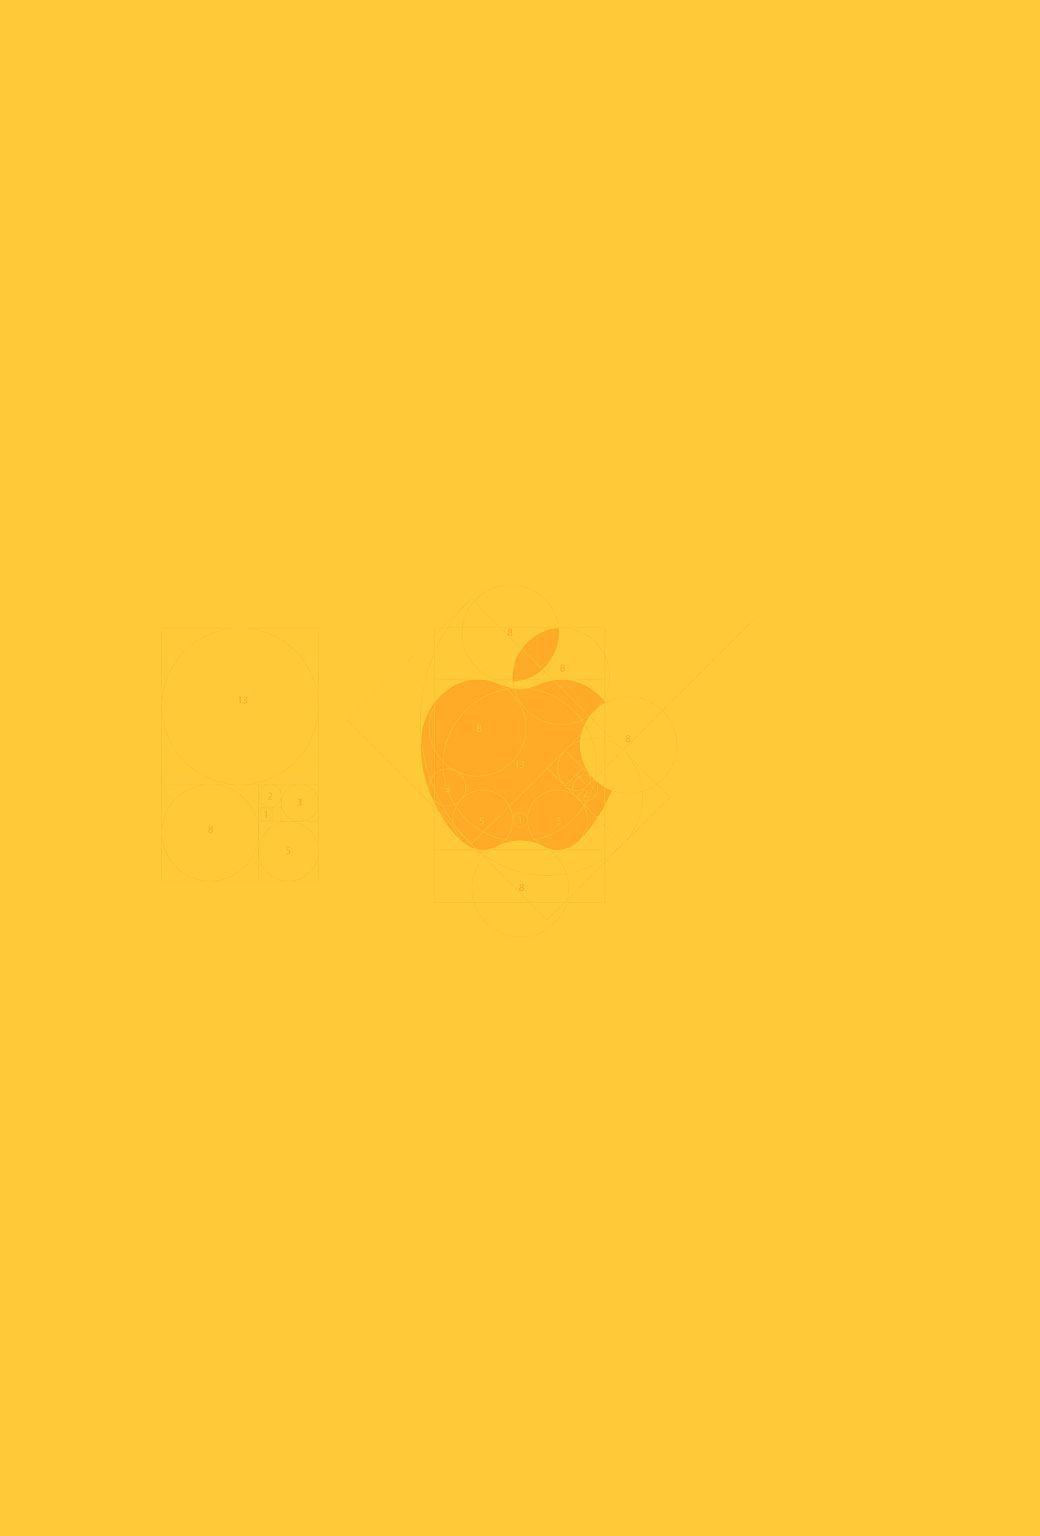 Yellow Apple Logo - yellow wallpaper for iphone - Bing images | Apple Love! in 2019 ...